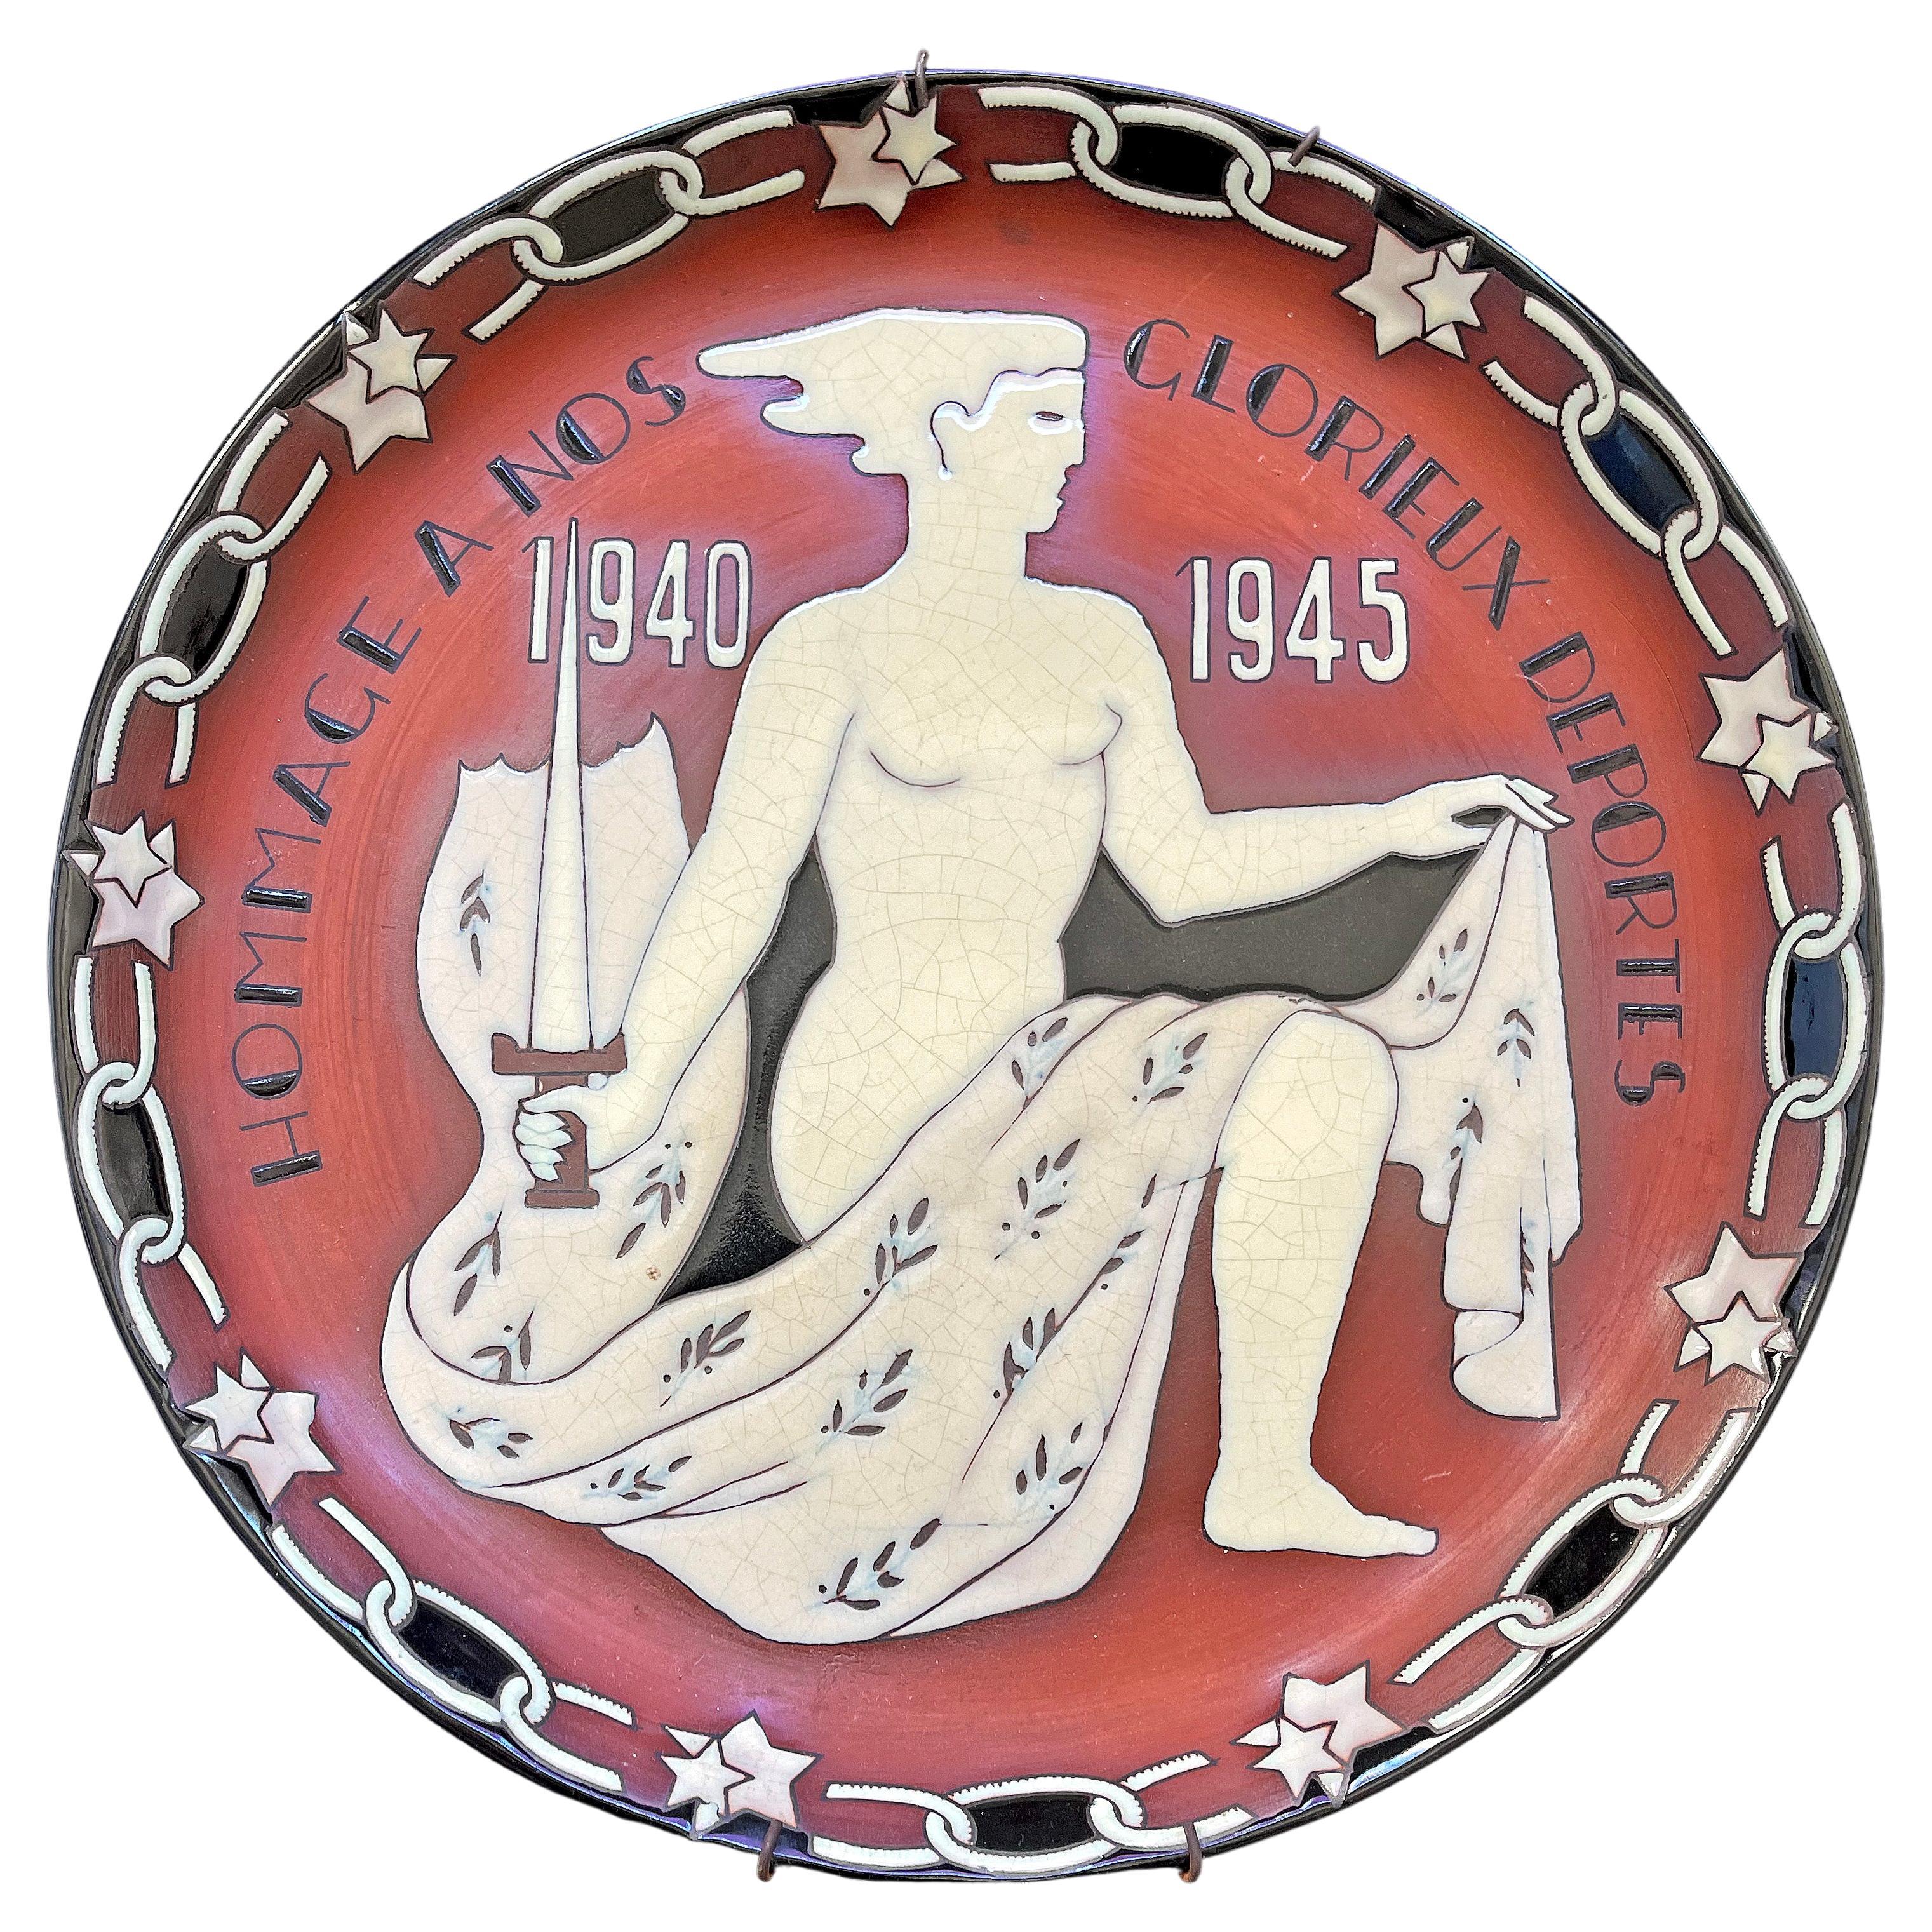 Homage to Belgian Resistance Against Nazis, Remarkable Wall Plate by d'hossche  For Sale